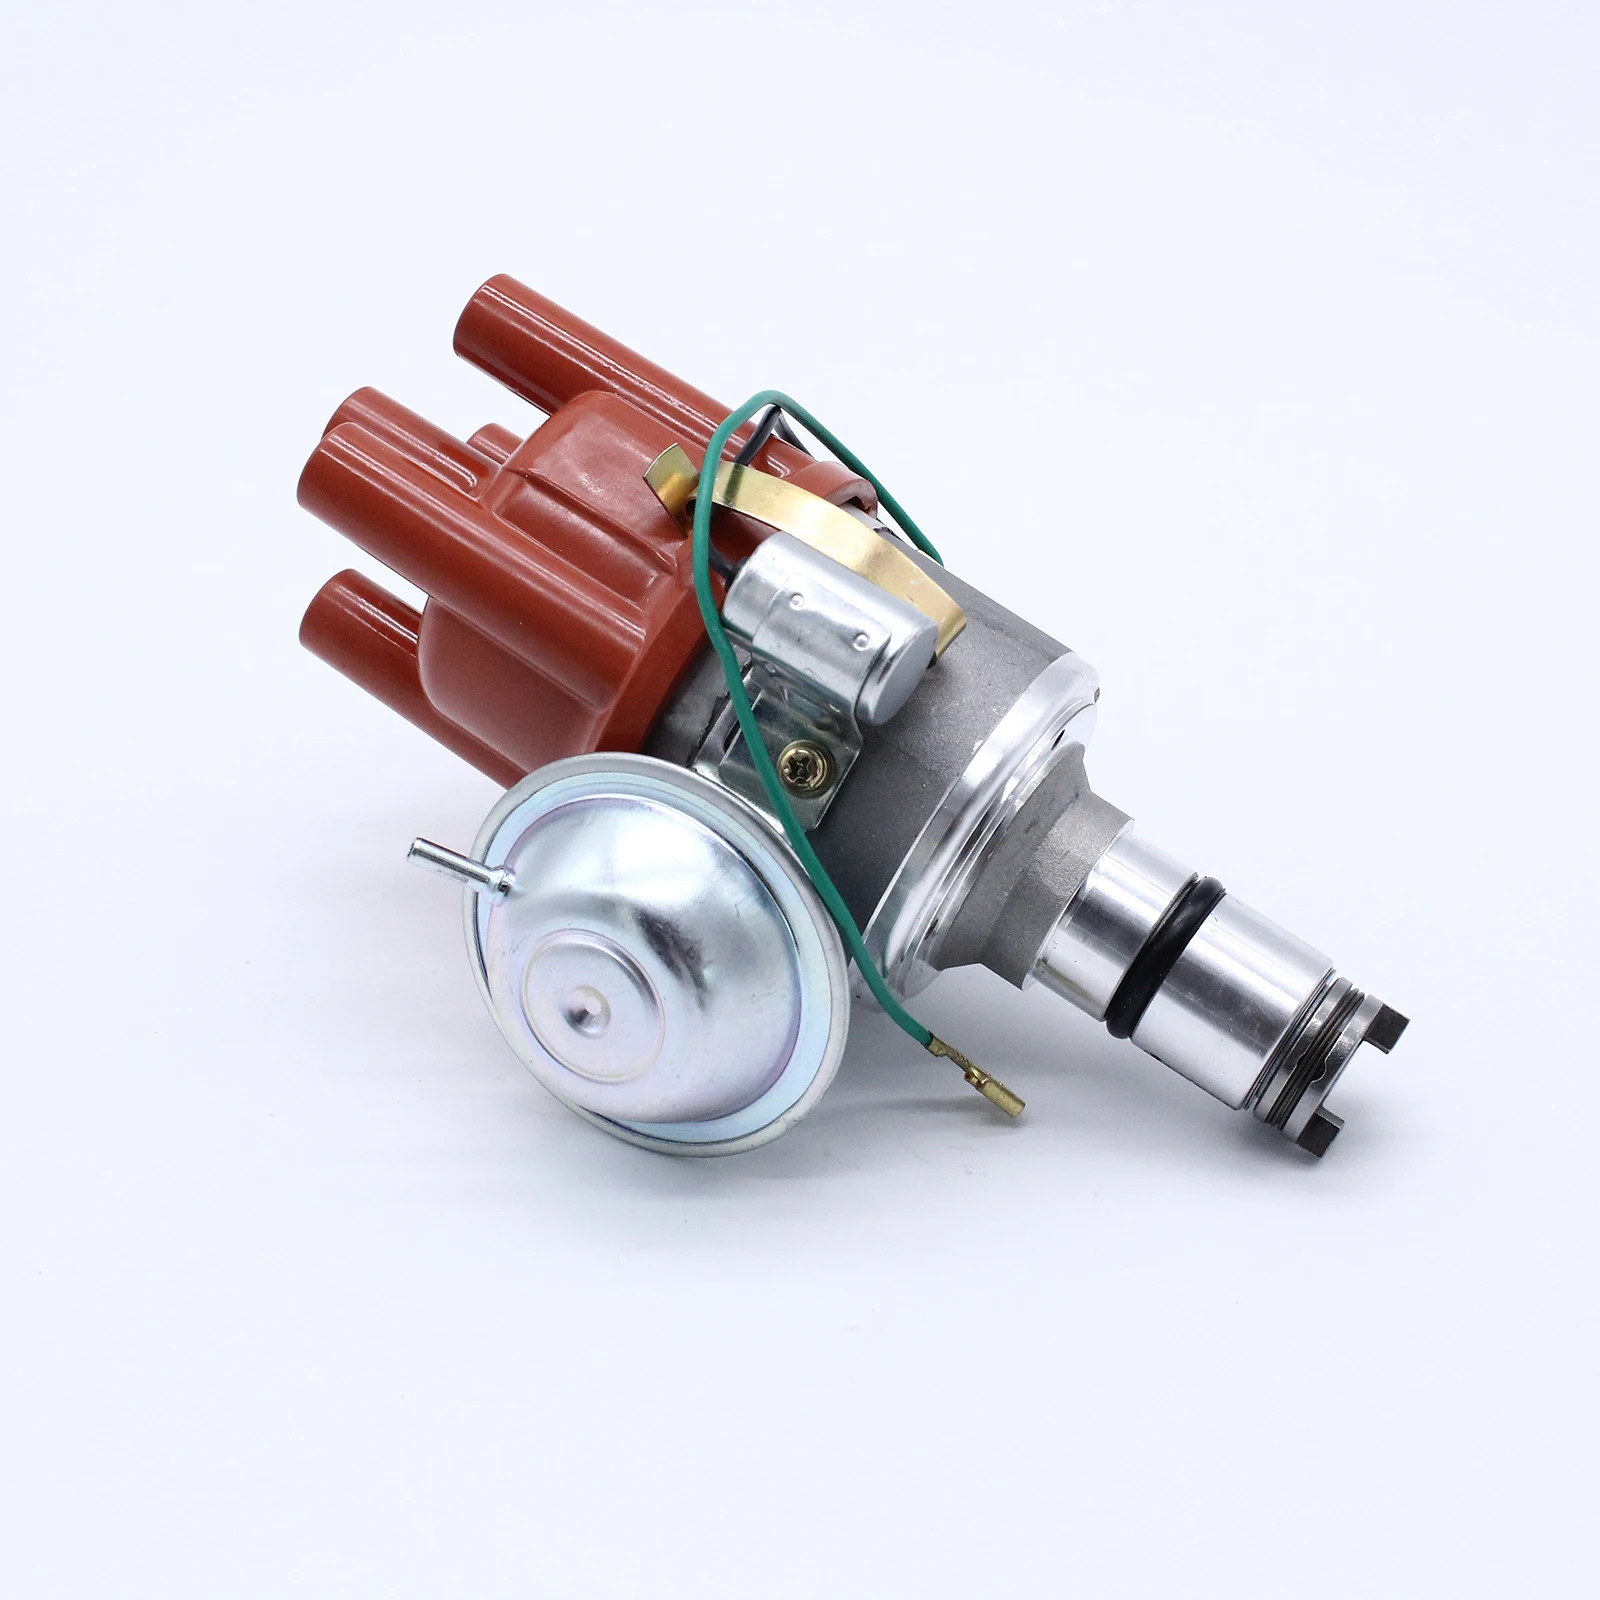 2021 brand new hot sale 043905205n 023117602b for volkswagen volkswagen beetle bug audi auto parts ignition distributor parts free global shipping